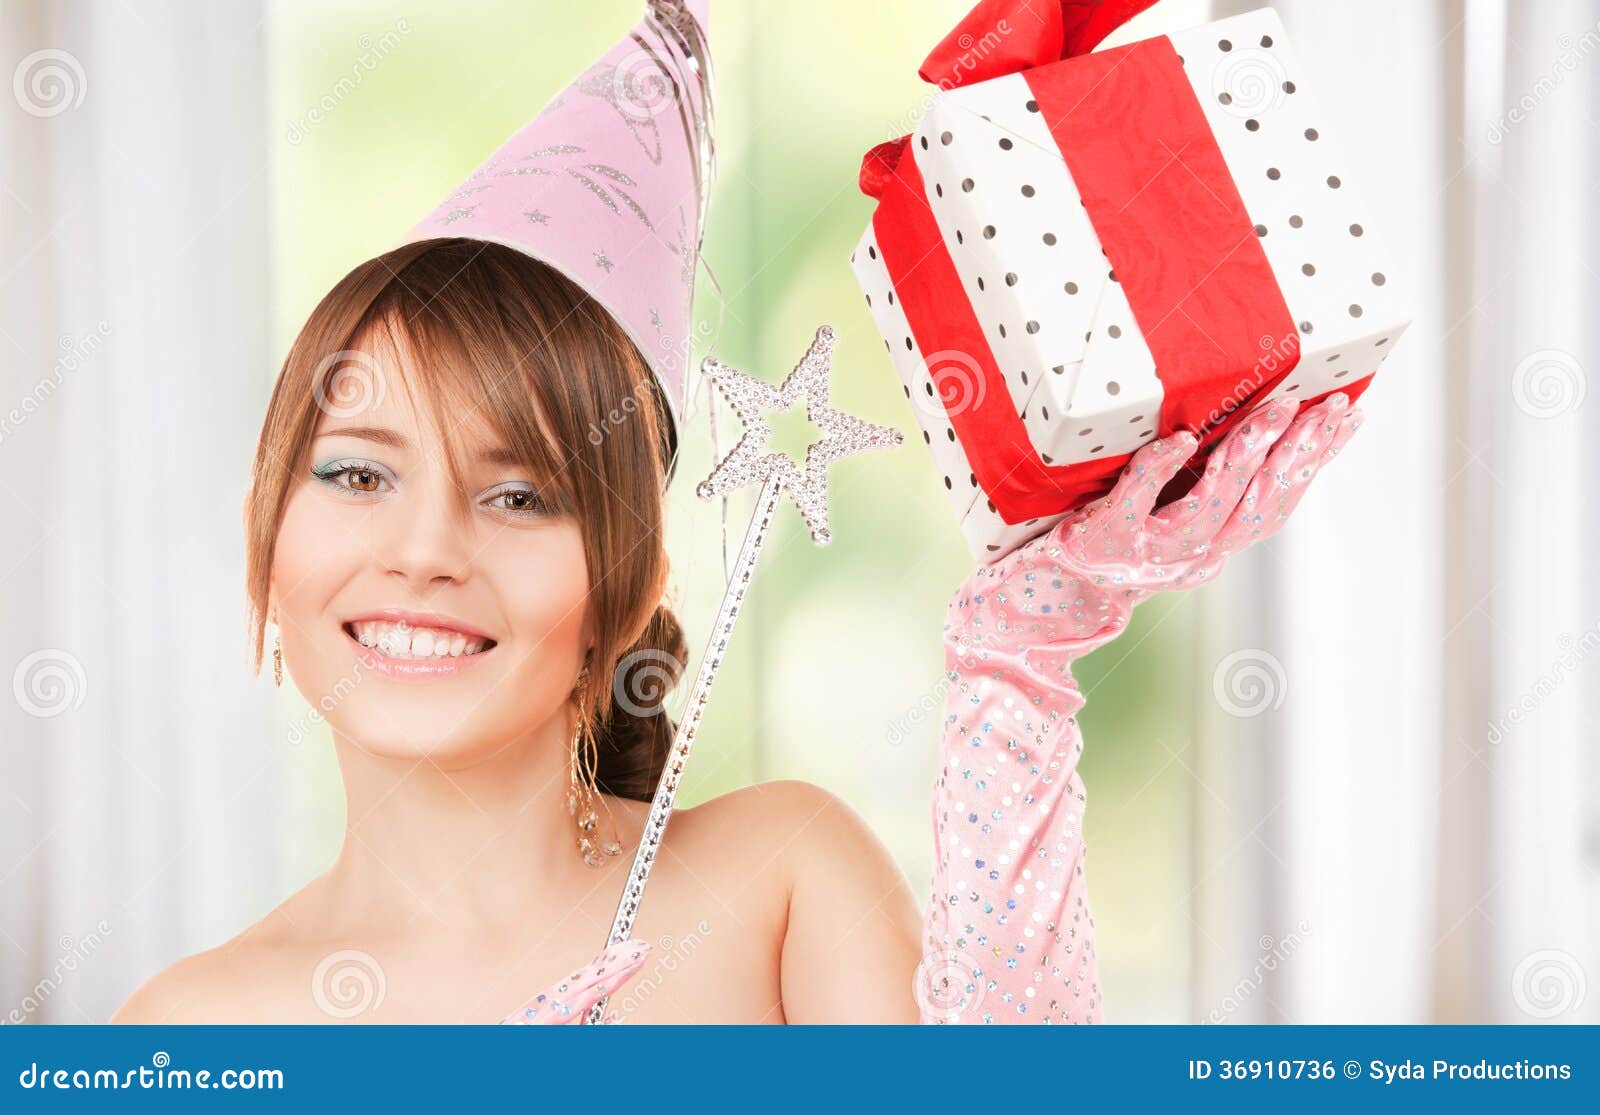 Teenage Party Girl With Magic Wand And Gift Box Stock Photo Image Of